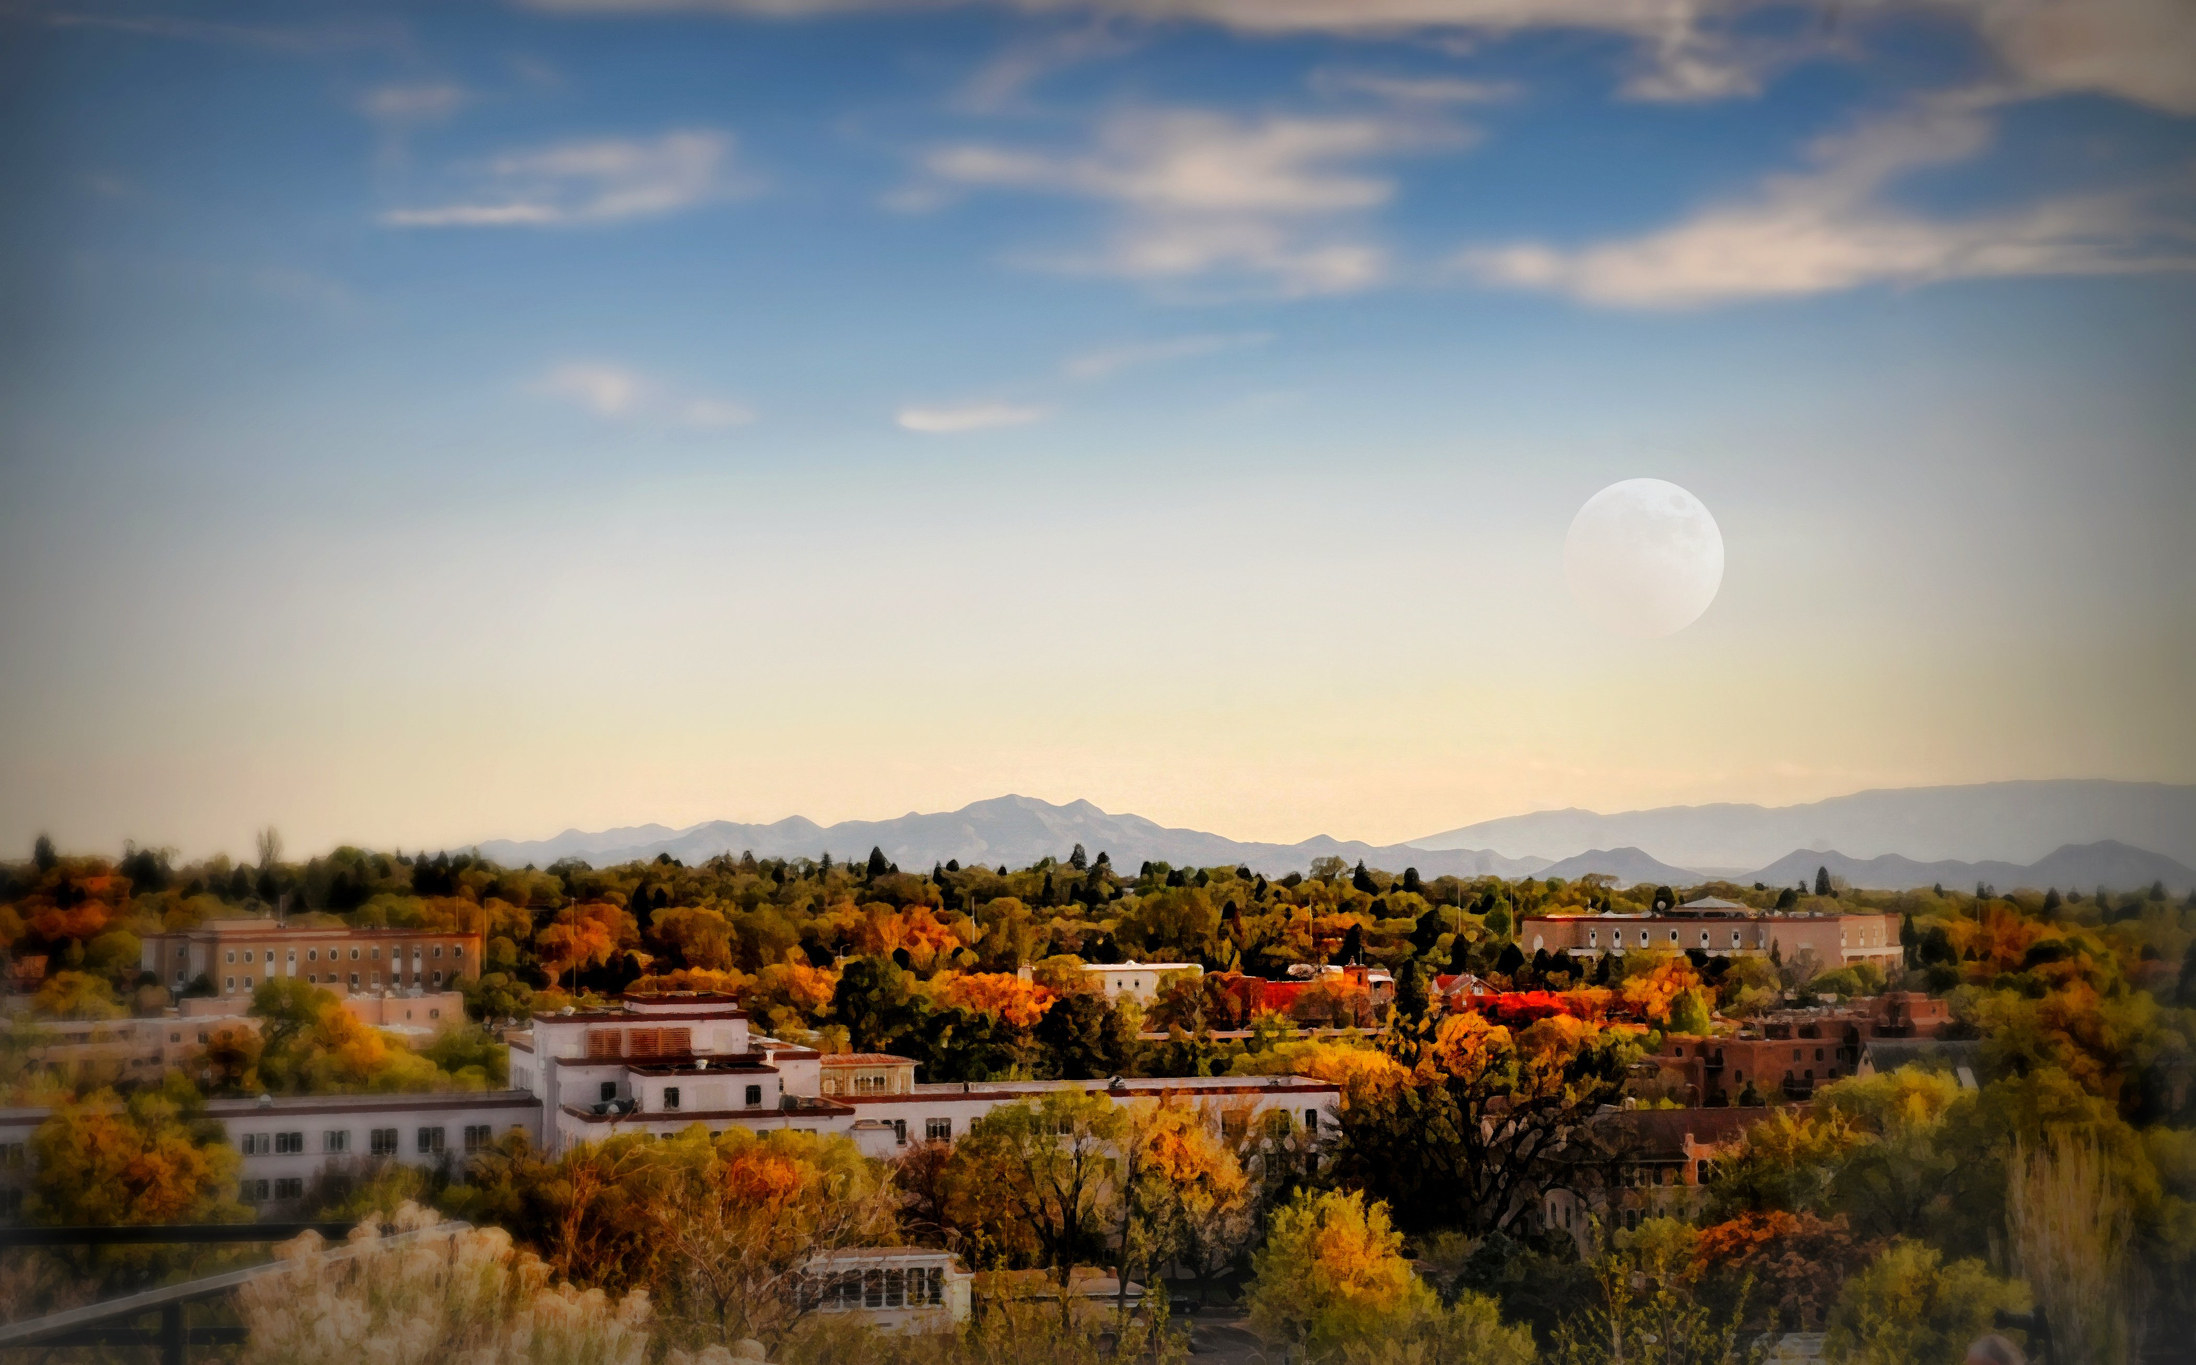 Landscape of Santa Fe New Mexico at dusk with warm colored trees and moon in sky.